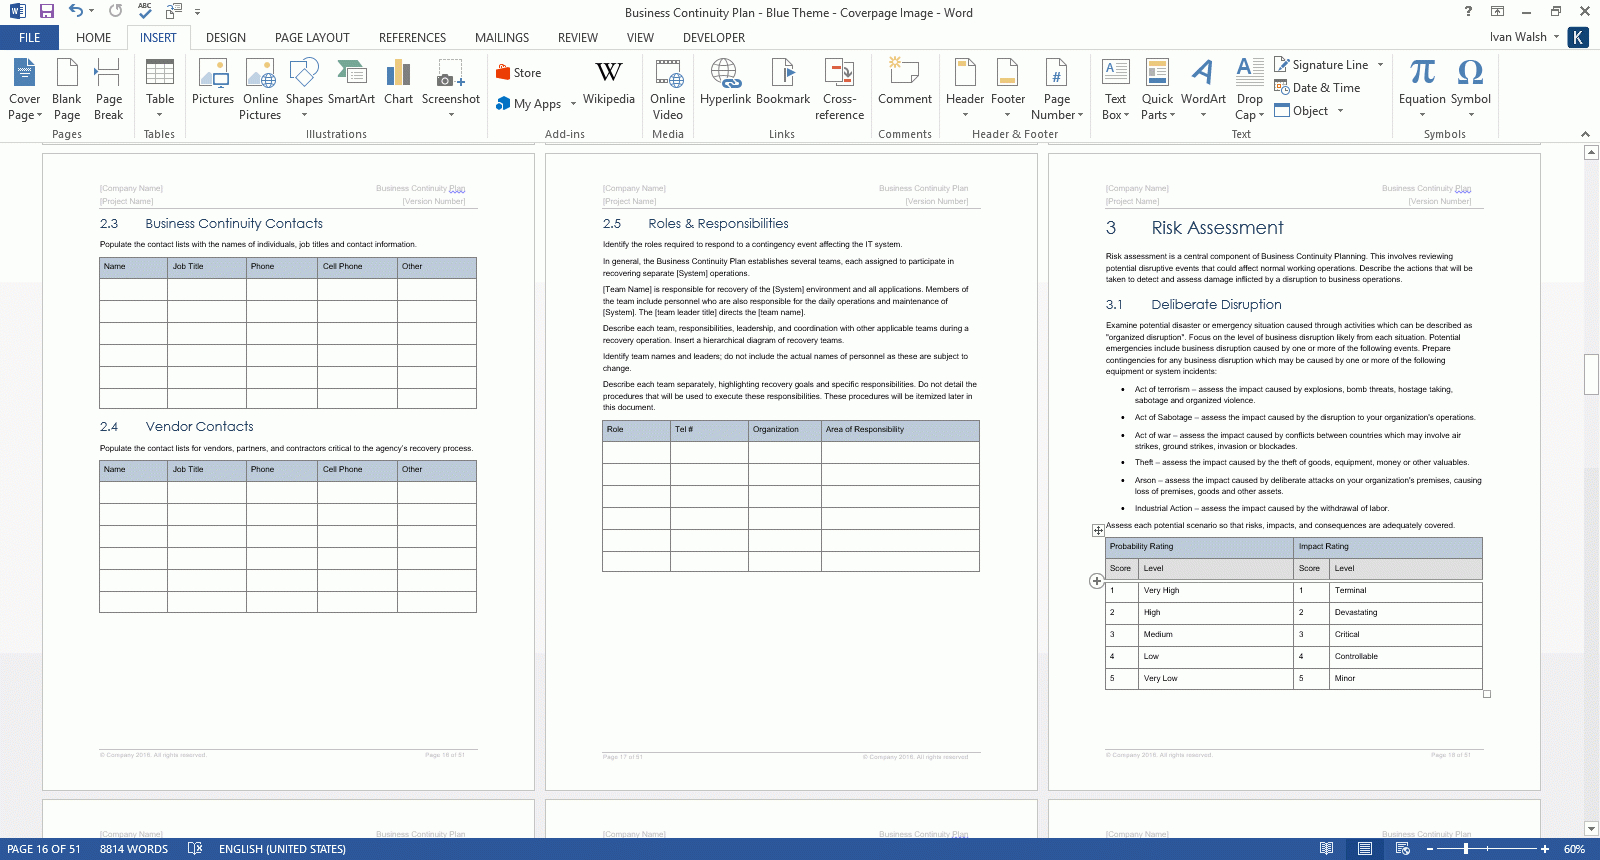 Business Continuity Templates (Ms Office) With Business Continuity Plan Risk Assessment Template